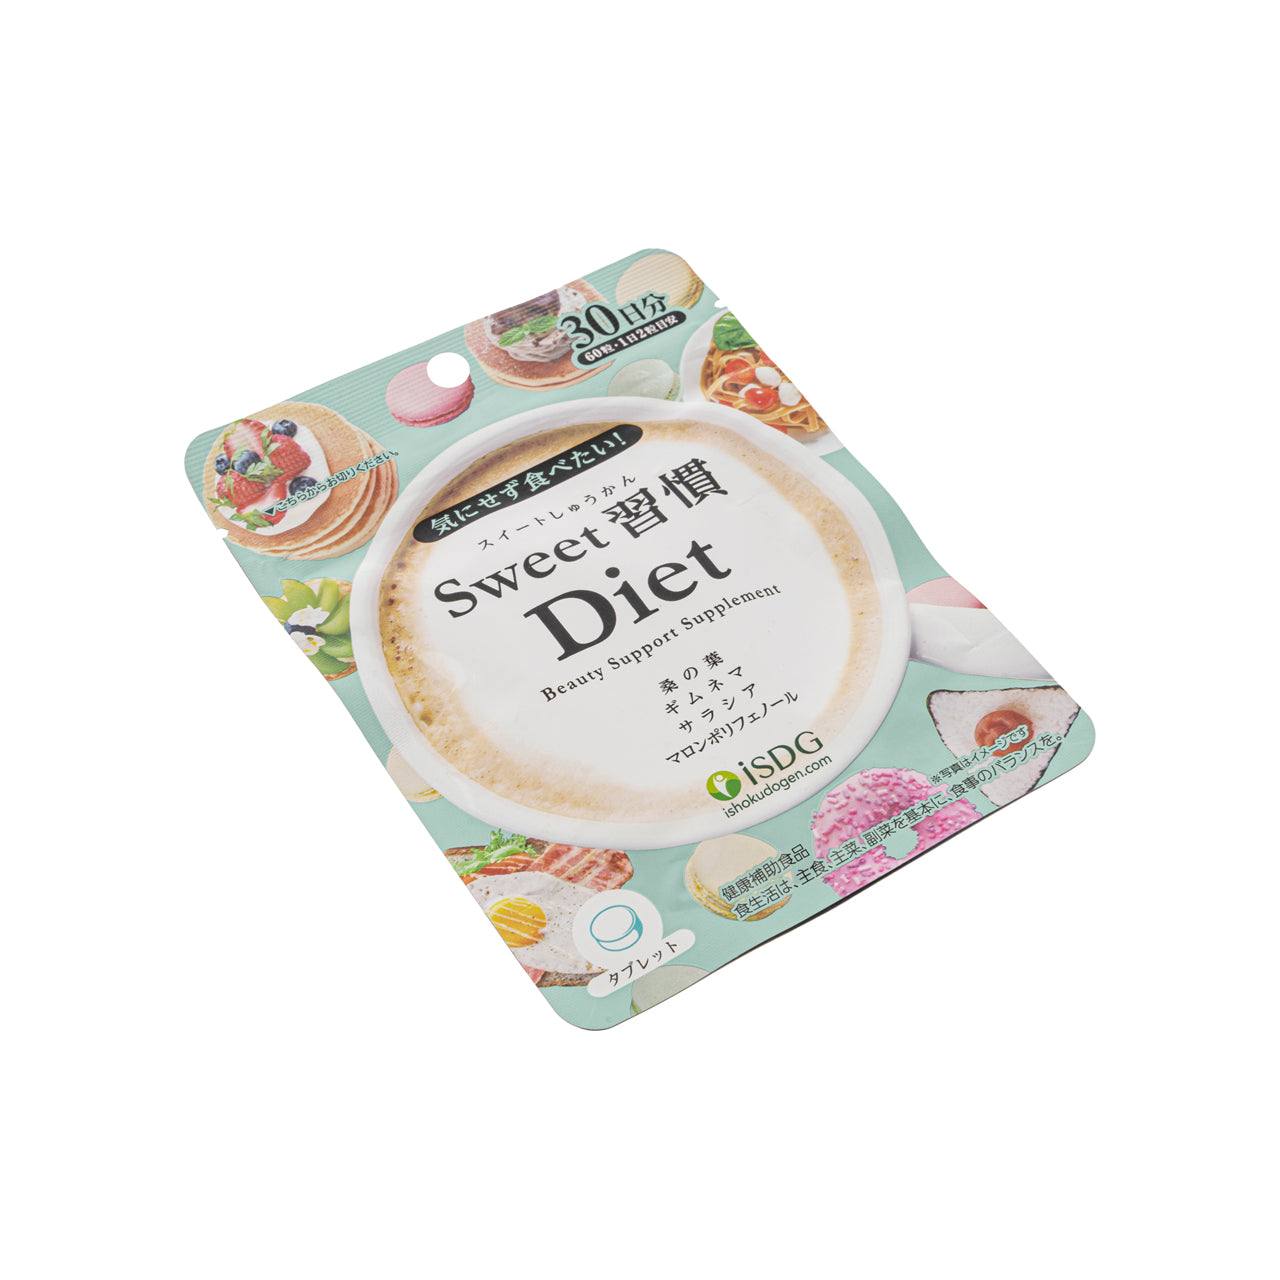 ISDG Sweet Diet Beauty Support Supplement 60 tablets